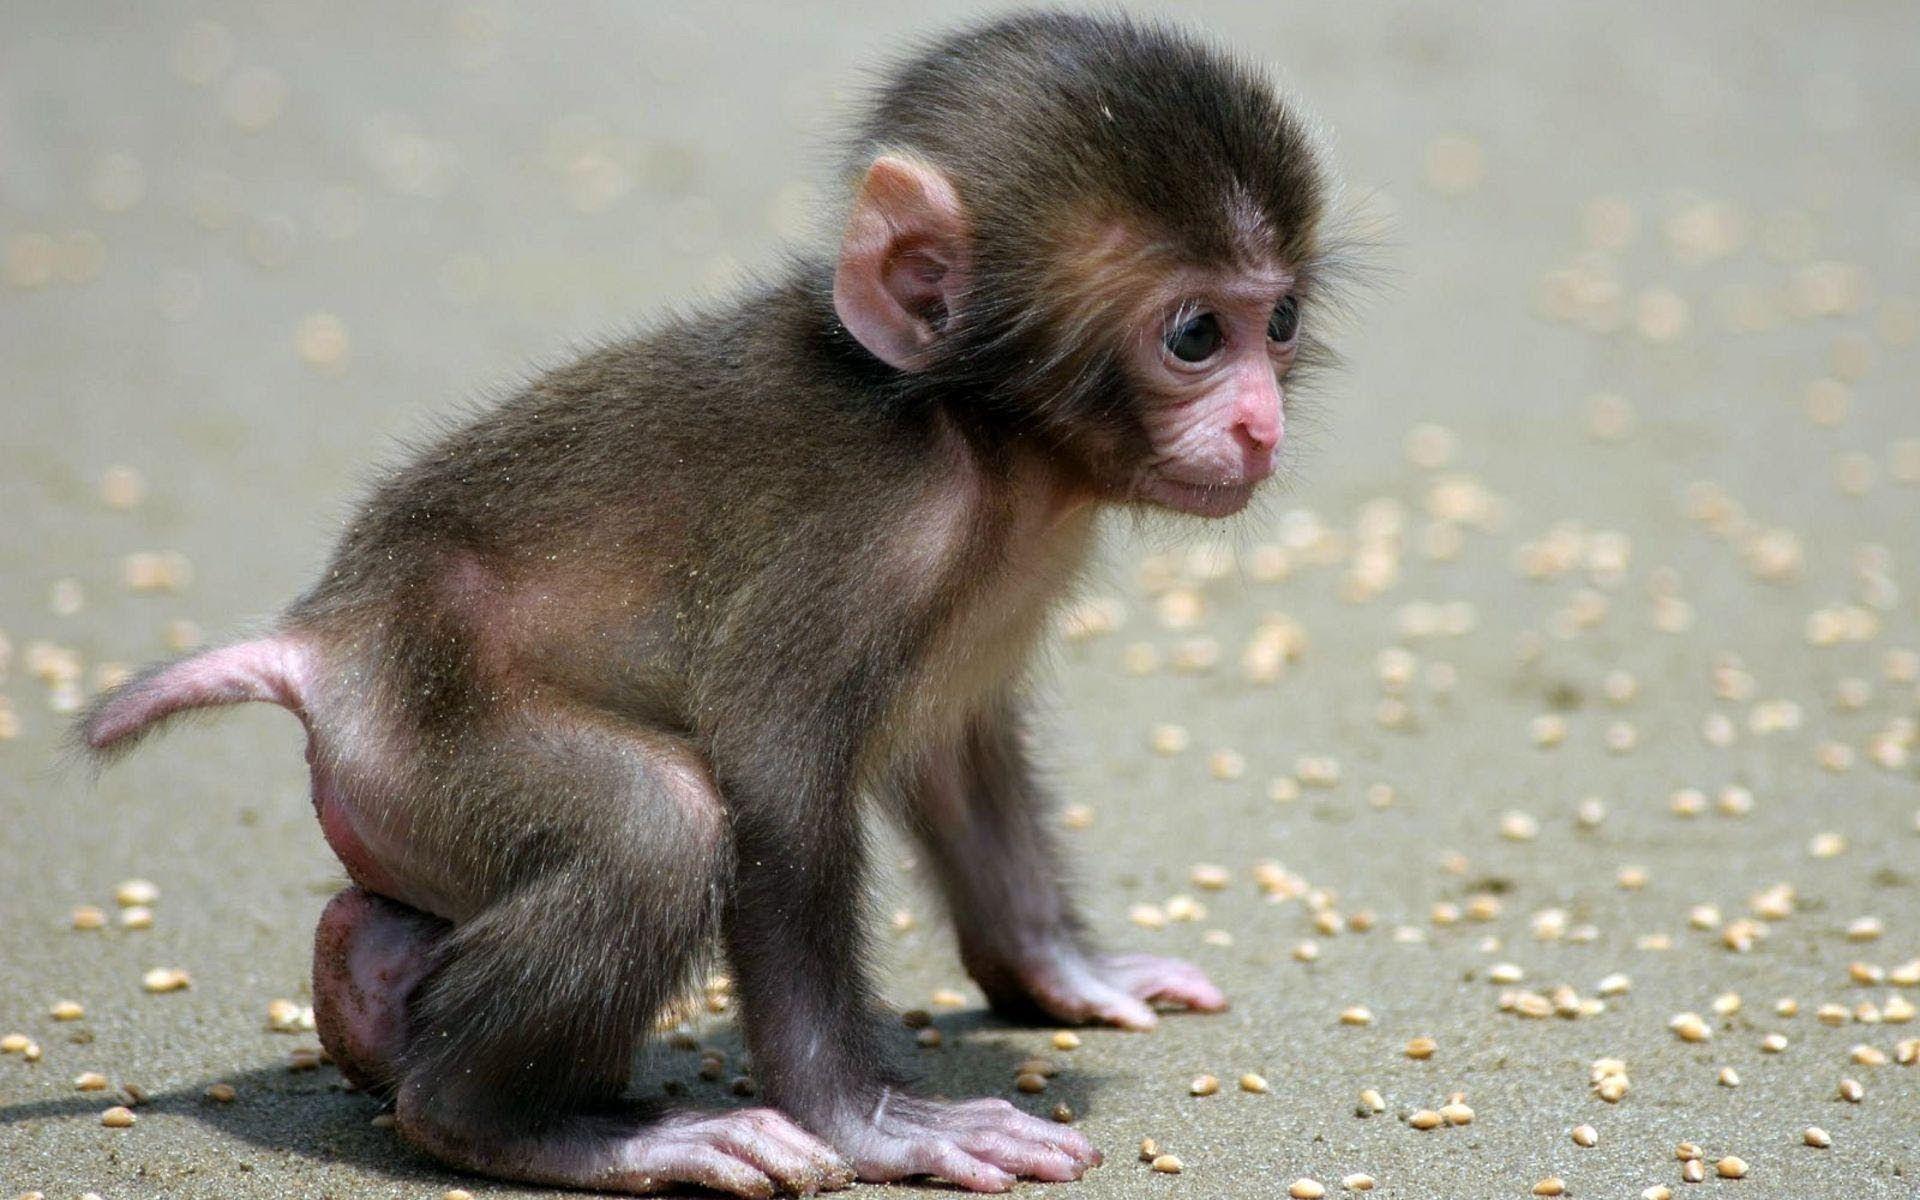 Funny Monkey. A Cute and Naughty Baby Monkey